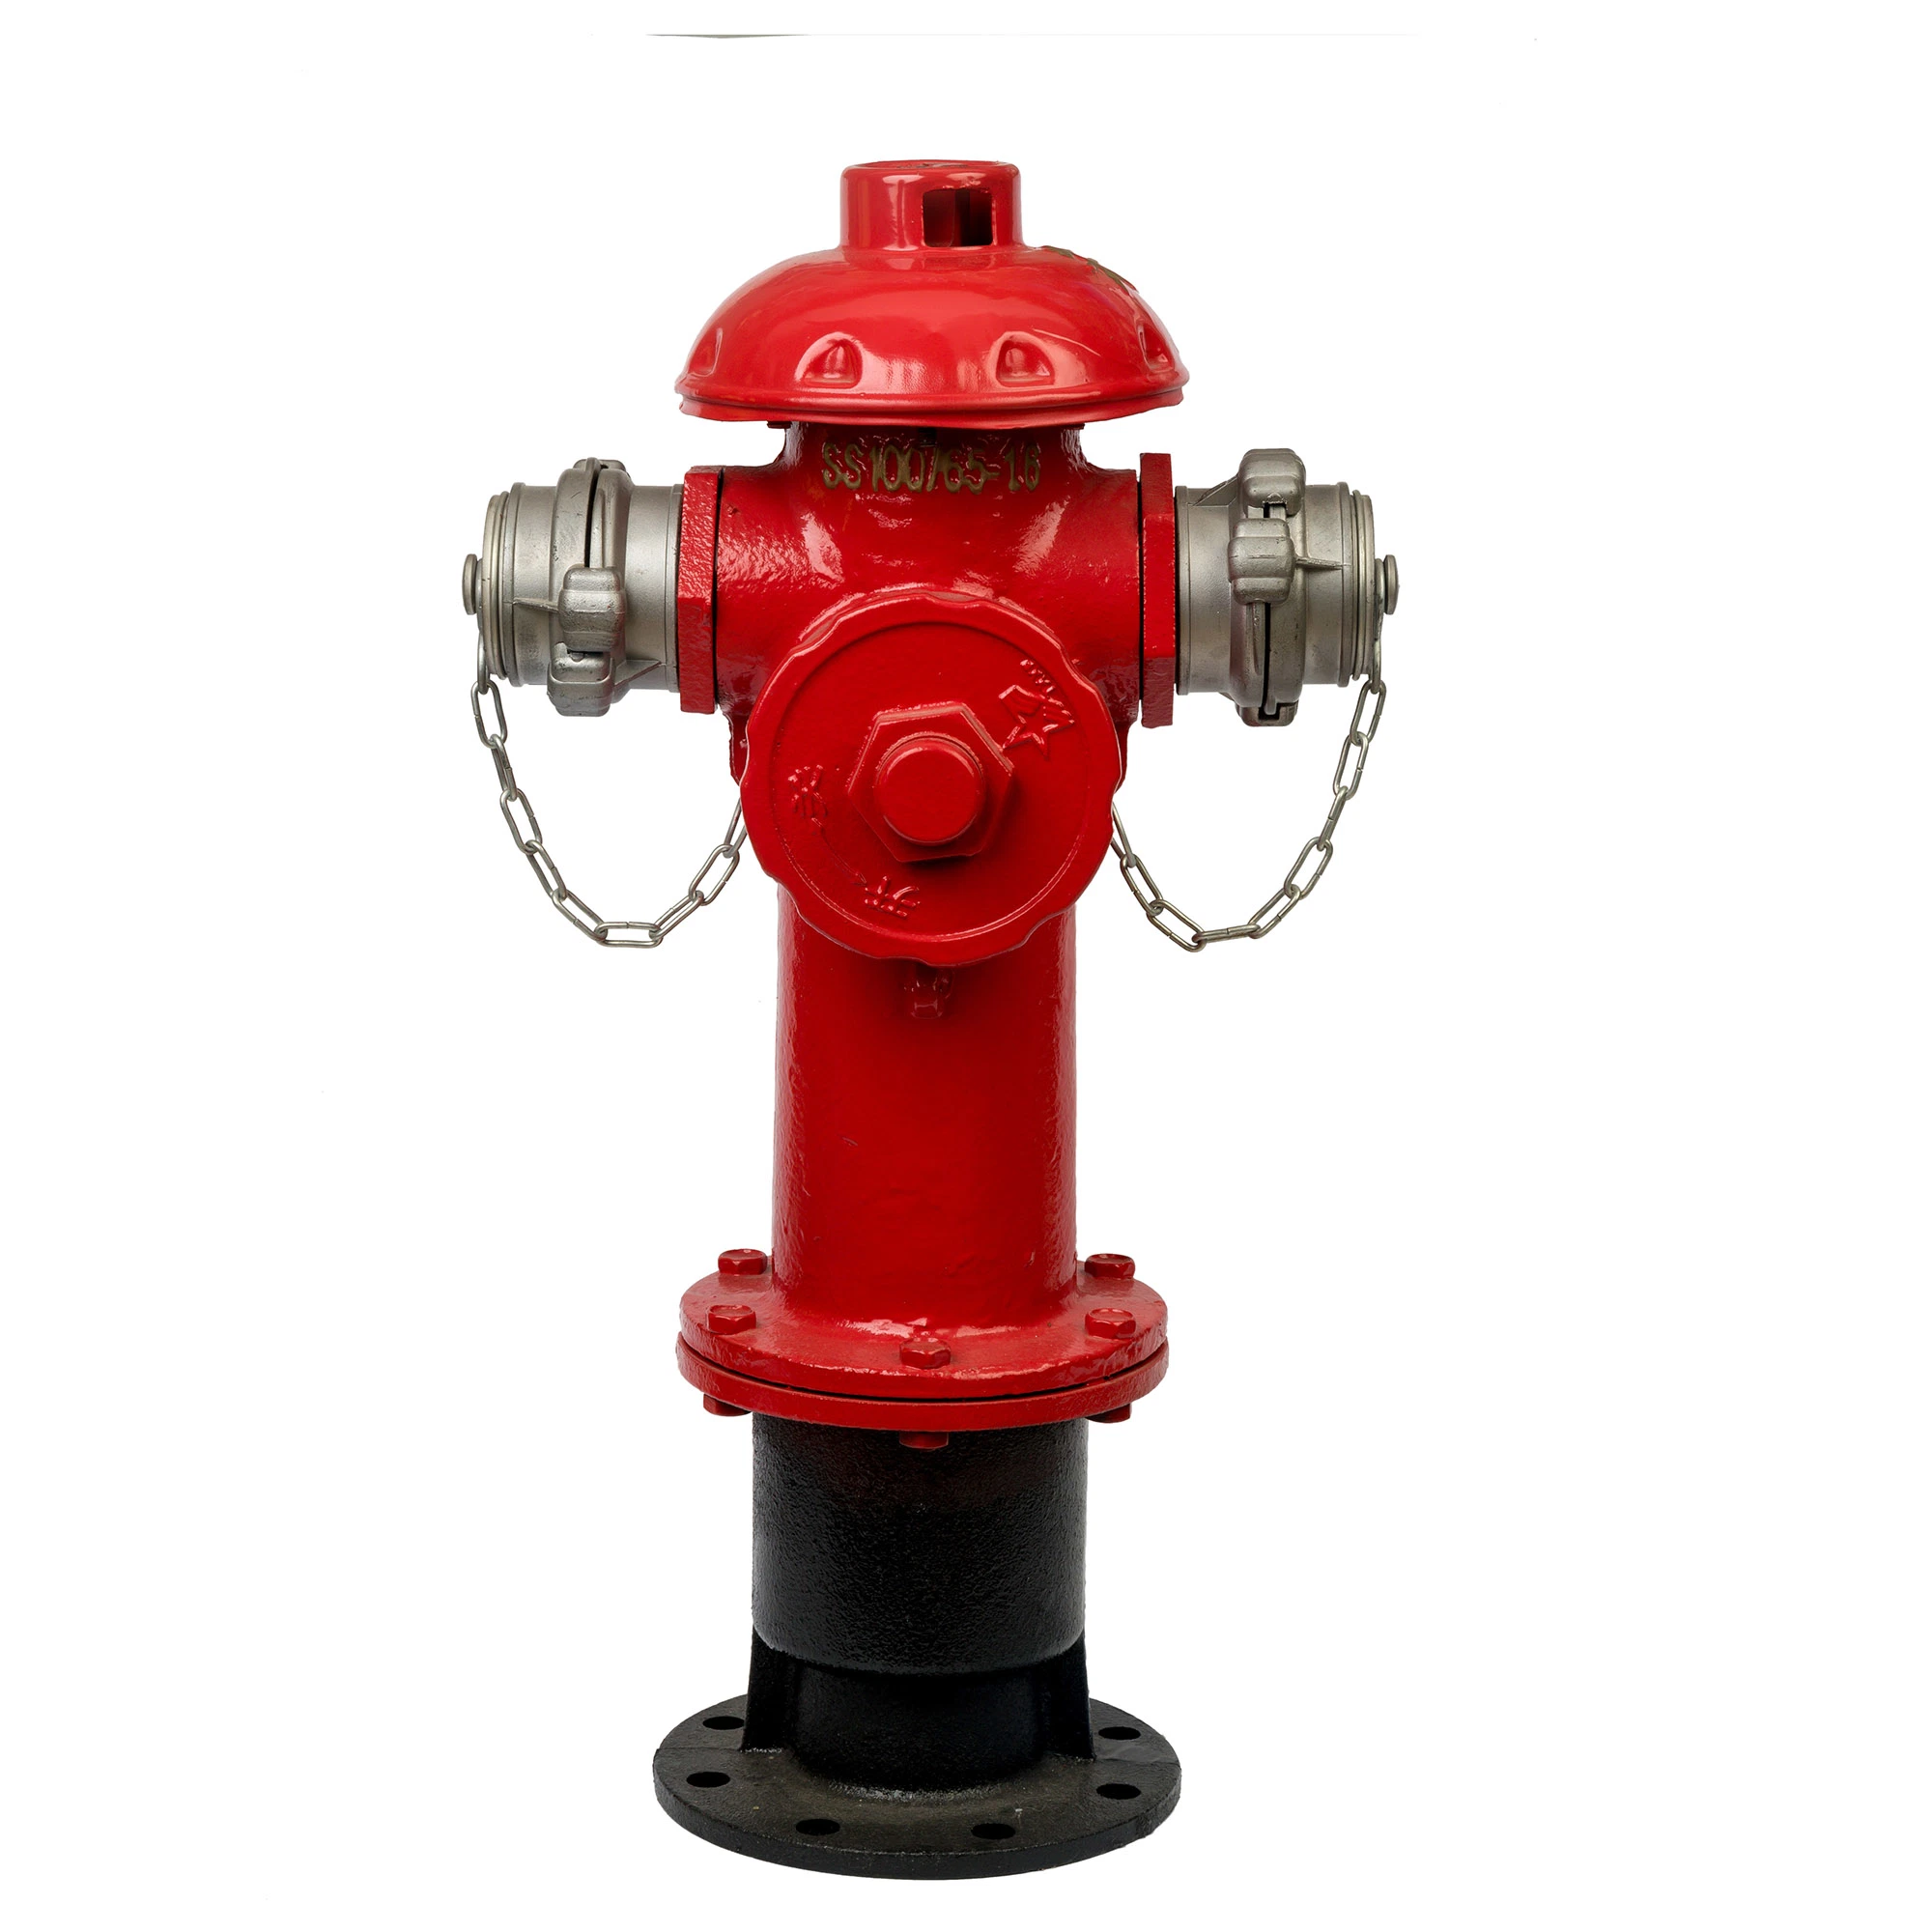 Underground Fire Hydrant, Fire Hydrant, Landing Fire Hydrant